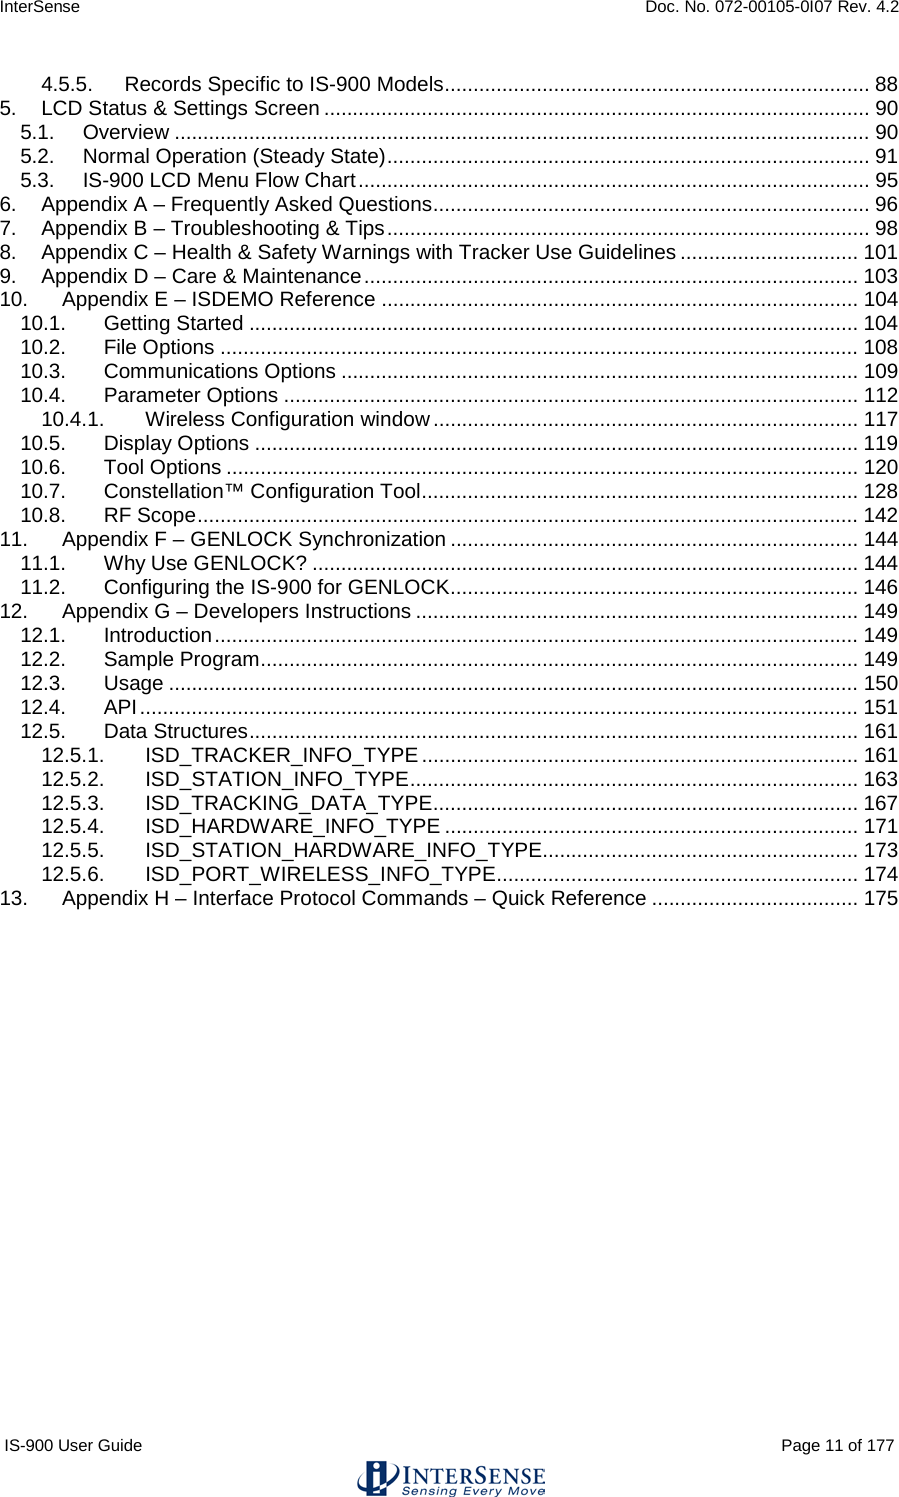 InterSense    Doc. No. 072-00105-0I07 Rev. 4.2 IS-900 User Guide                                                                                                                                          Page 11 of 177  4.5.5. Records Specific to IS-900 Models .......................................................................... 88 5. LCD Status &amp; Settings Screen ............................................................................................... 90 5.1. Overview ......................................................................................................................... 90 5.2. Normal Operation (Steady State) .................................................................................... 91 5.3. IS-900 LCD Menu Flow Chart ......................................................................................... 95 6. Appendix A – Frequently Asked Questions ............................................................................ 96 7. Appendix B – Troubleshooting &amp; Tips .................................................................................... 98 8. Appendix C – Health &amp; Safety Warnings with Tracker Use Guidelines ............................... 101 9. Appendix D – Care &amp; Maintenance ...................................................................................... 103 10. Appendix E – ISDEMO Reference ................................................................................... 104 10.1. Getting Started .......................................................................................................... 104 10.2. File Options ............................................................................................................... 108 10.3. Communications Options .......................................................................................... 109 10.4. Parameter Options .................................................................................................... 112 10.4.1. Wireless Configuration window .......................................................................... 117 10.5. Display Options ......................................................................................................... 119 10.6. Tool Options .............................................................................................................. 120 10.7. Constellation™ Configuration Tool ............................................................................ 128 10.8. RF Scope ................................................................................................................... 142 11. Appendix F – GENLOCK Synchronization ....................................................................... 144 11.1. Why Use GENLOCK? ............................................................................................... 144 11.2. Configuring the IS-900 for GENLOCK ....................................................................... 146 12. Appendix G – Developers Instructions ............................................................................. 149 12.1. Introduction ................................................................................................................ 149 12.2. Sample Program ........................................................................................................ 149 12.3. Usage ........................................................................................................................ 150 12.4. API ............................................................................................................................. 151 12.5. Data Structures .......................................................................................................... 161 12.5.1. ISD_TRACKER_INFO_TYPE ............................................................................ 161 12.5.2. ISD_STATION_INFO_TYPE .............................................................................. 163 12.5.3. ISD_TRACKING_DATA_TYPE .......................................................................... 167 12.5.4. ISD_HARDWARE_INFO_TYPE ........................................................................ 171 12.5.5. ISD_STATION_HARDWARE_INFO_TYPE....................................................... 173 12.5.6. ISD_PORT_WIRELESS_INFO_TYPE ............................................................... 174 13. Appendix H – Interface Protocol Commands – Quick Reference .................................... 175     